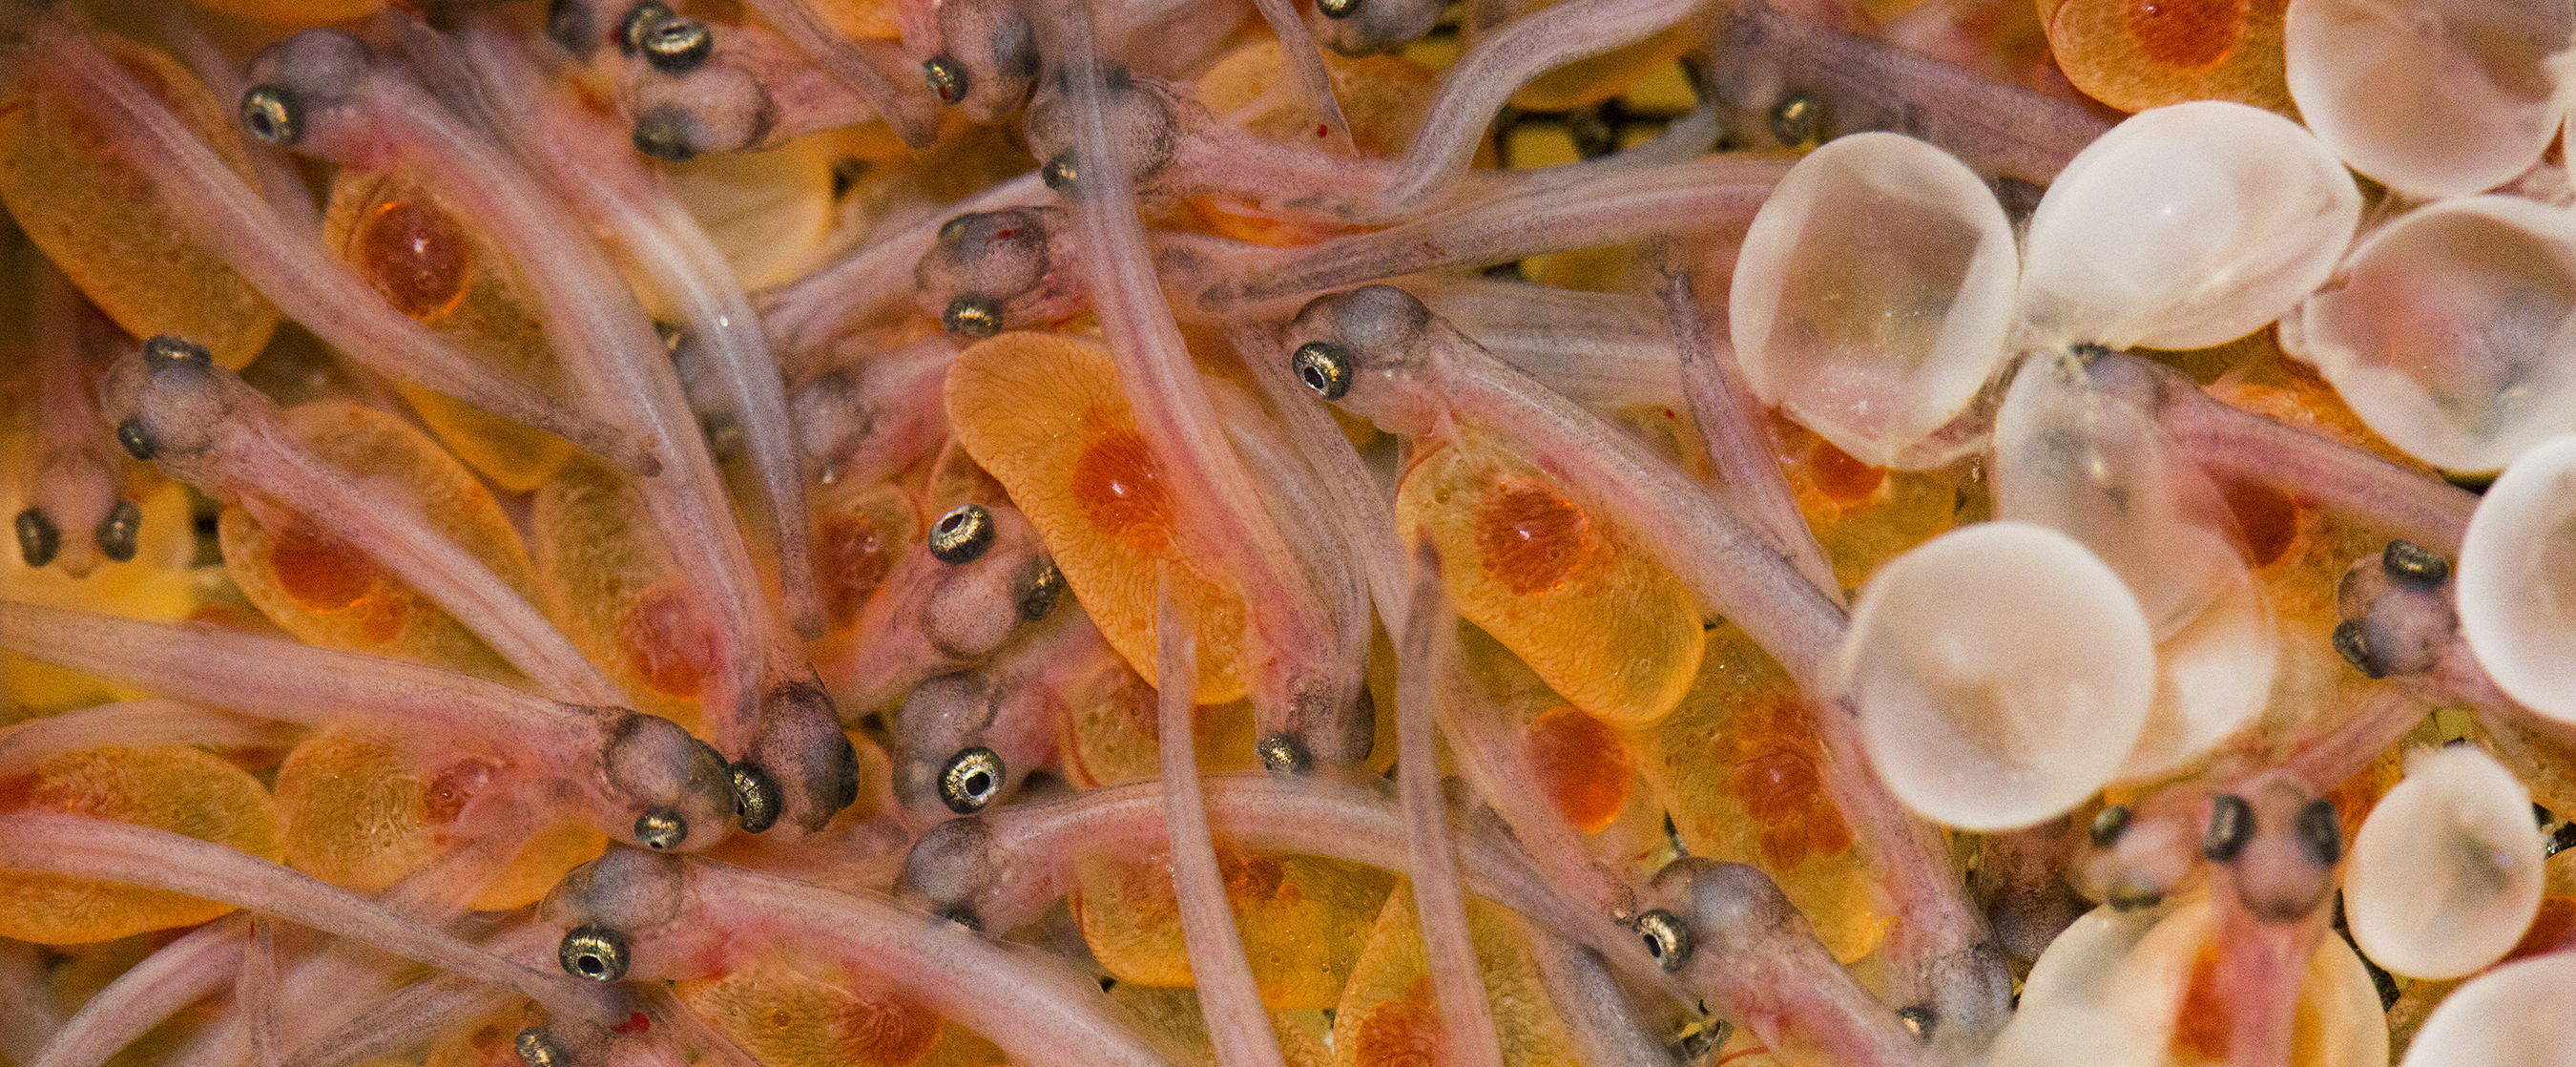 Newly hatched rainbow trout